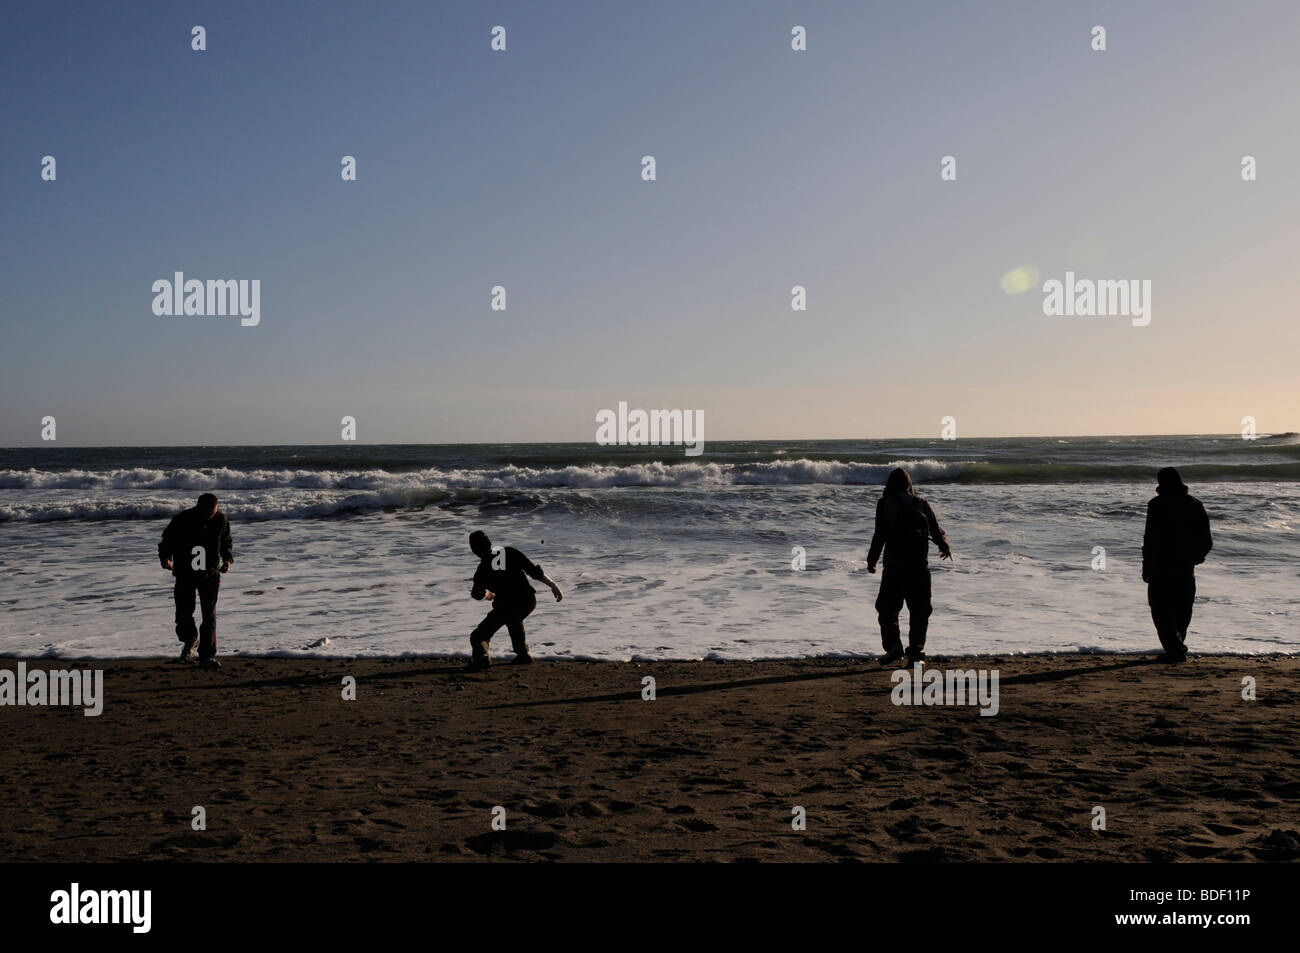 Boys skip stones into the sea and play on Muir Beach in the Golden Gate National Park, California, USA. Stock Photo